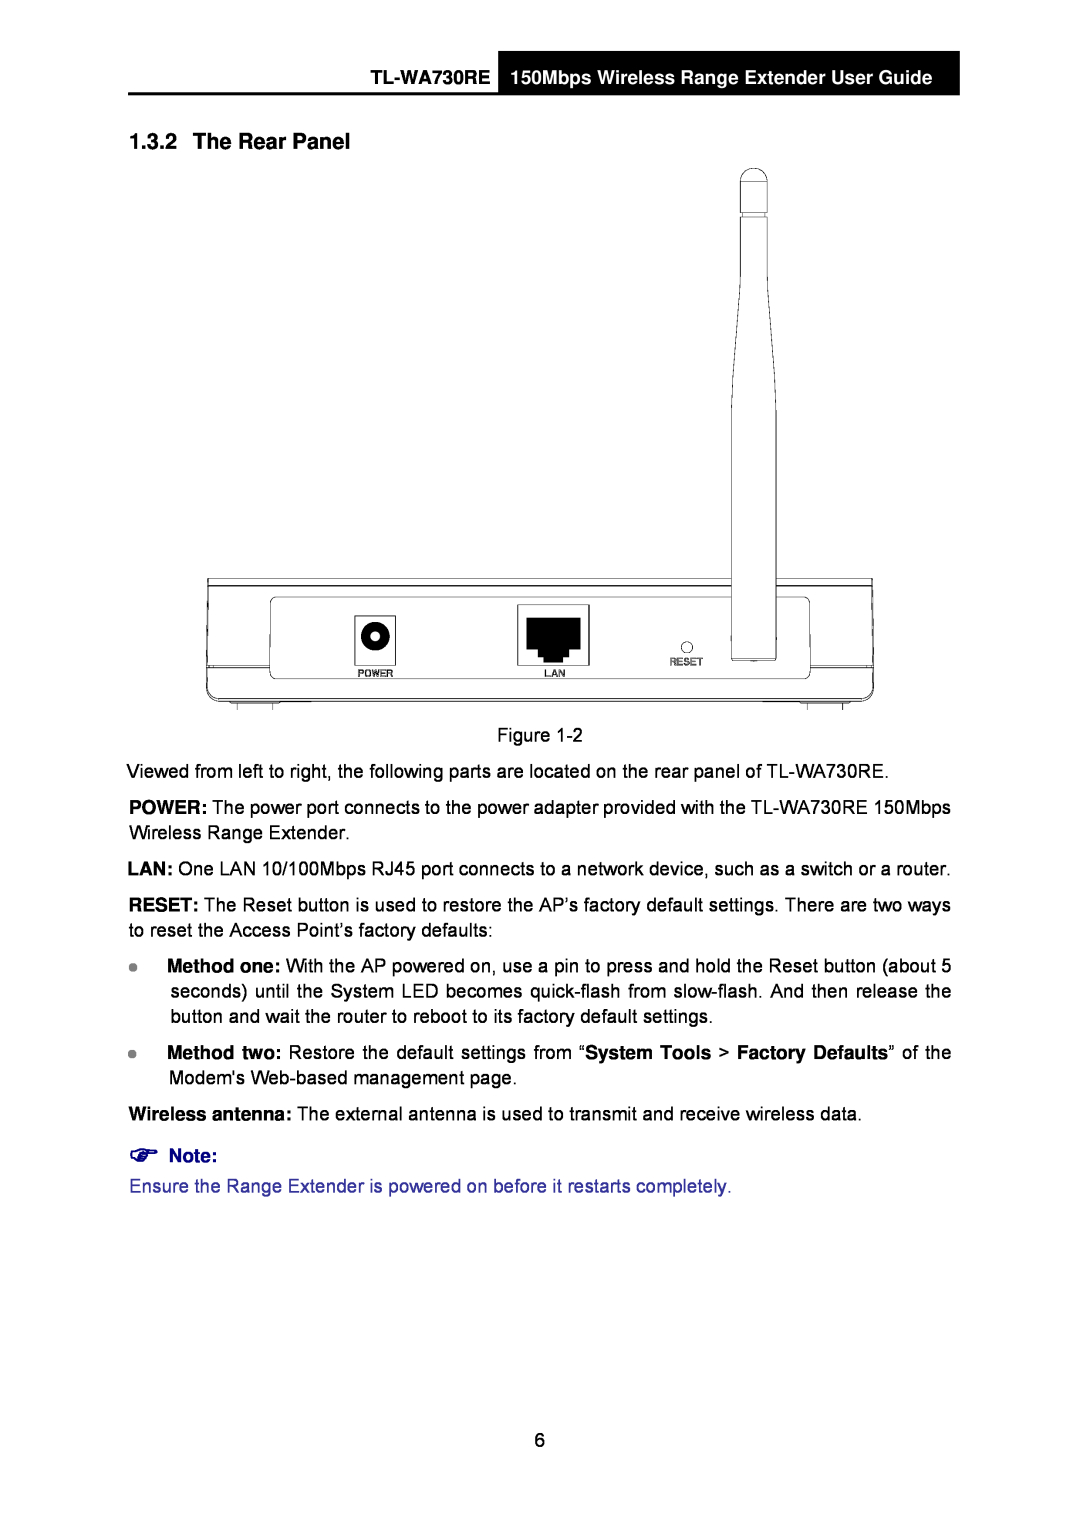 TP-Link manual The Rear Panel, TL-WA730RE 150Mbps Wireless Range Extender User Guide 